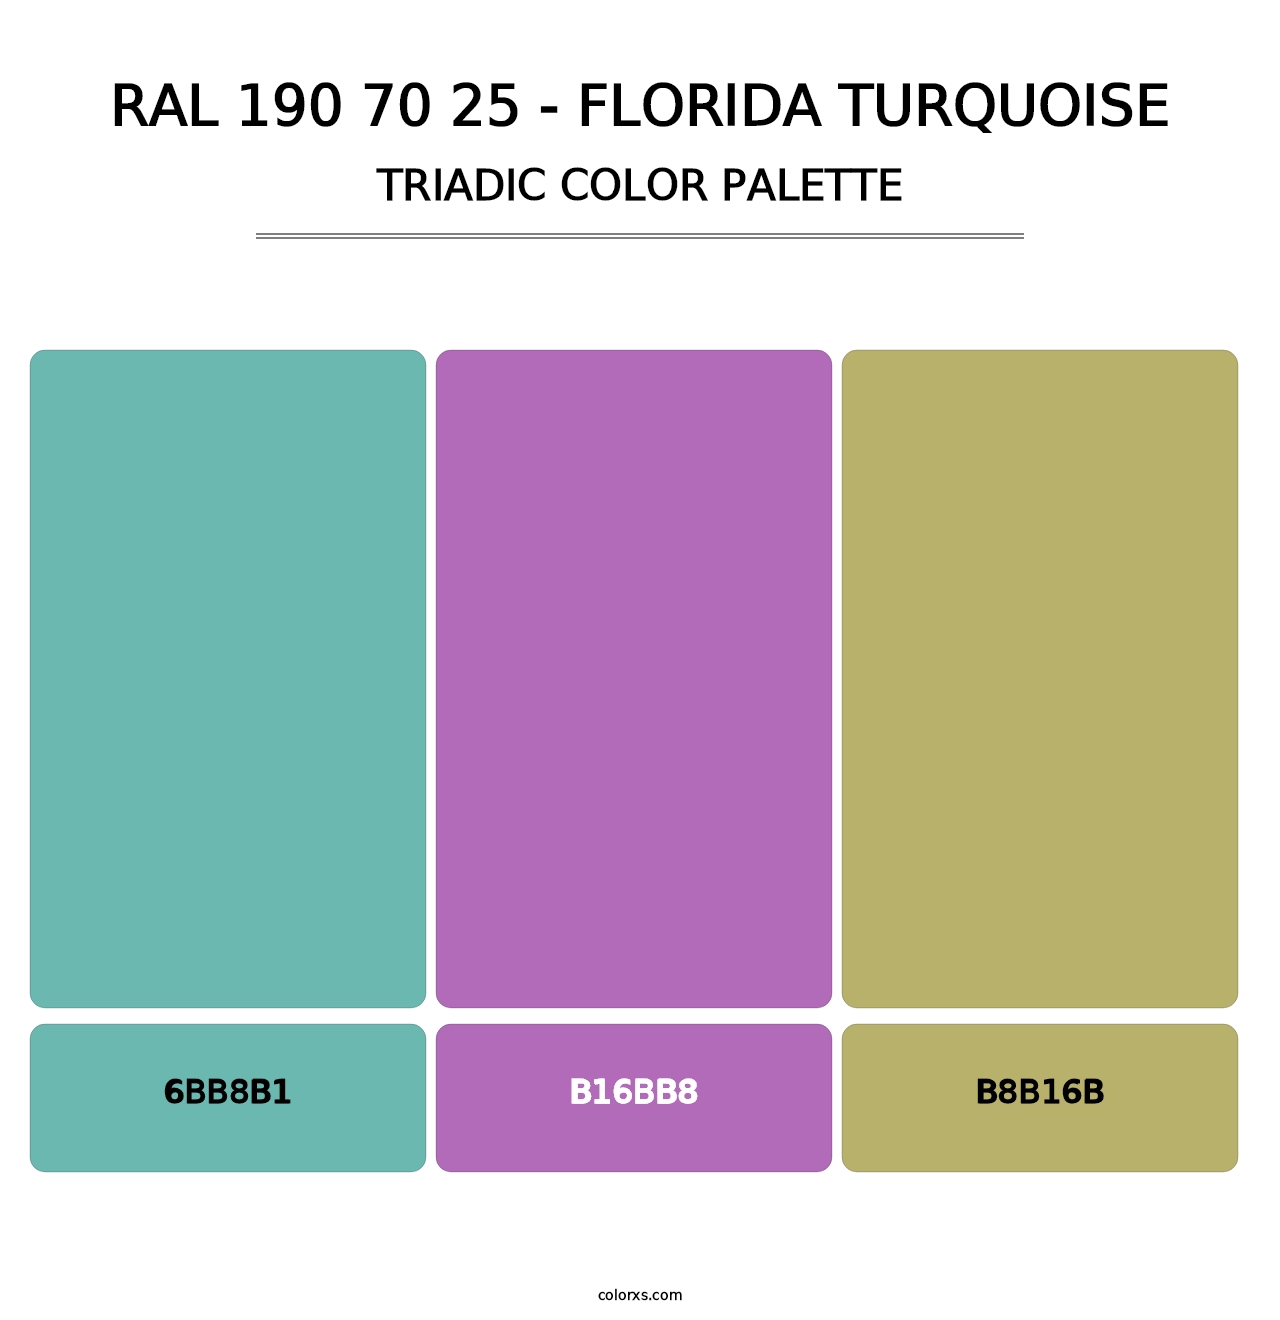 RAL 190 70 25 - Florida Turquoise - Triadic Color Palette